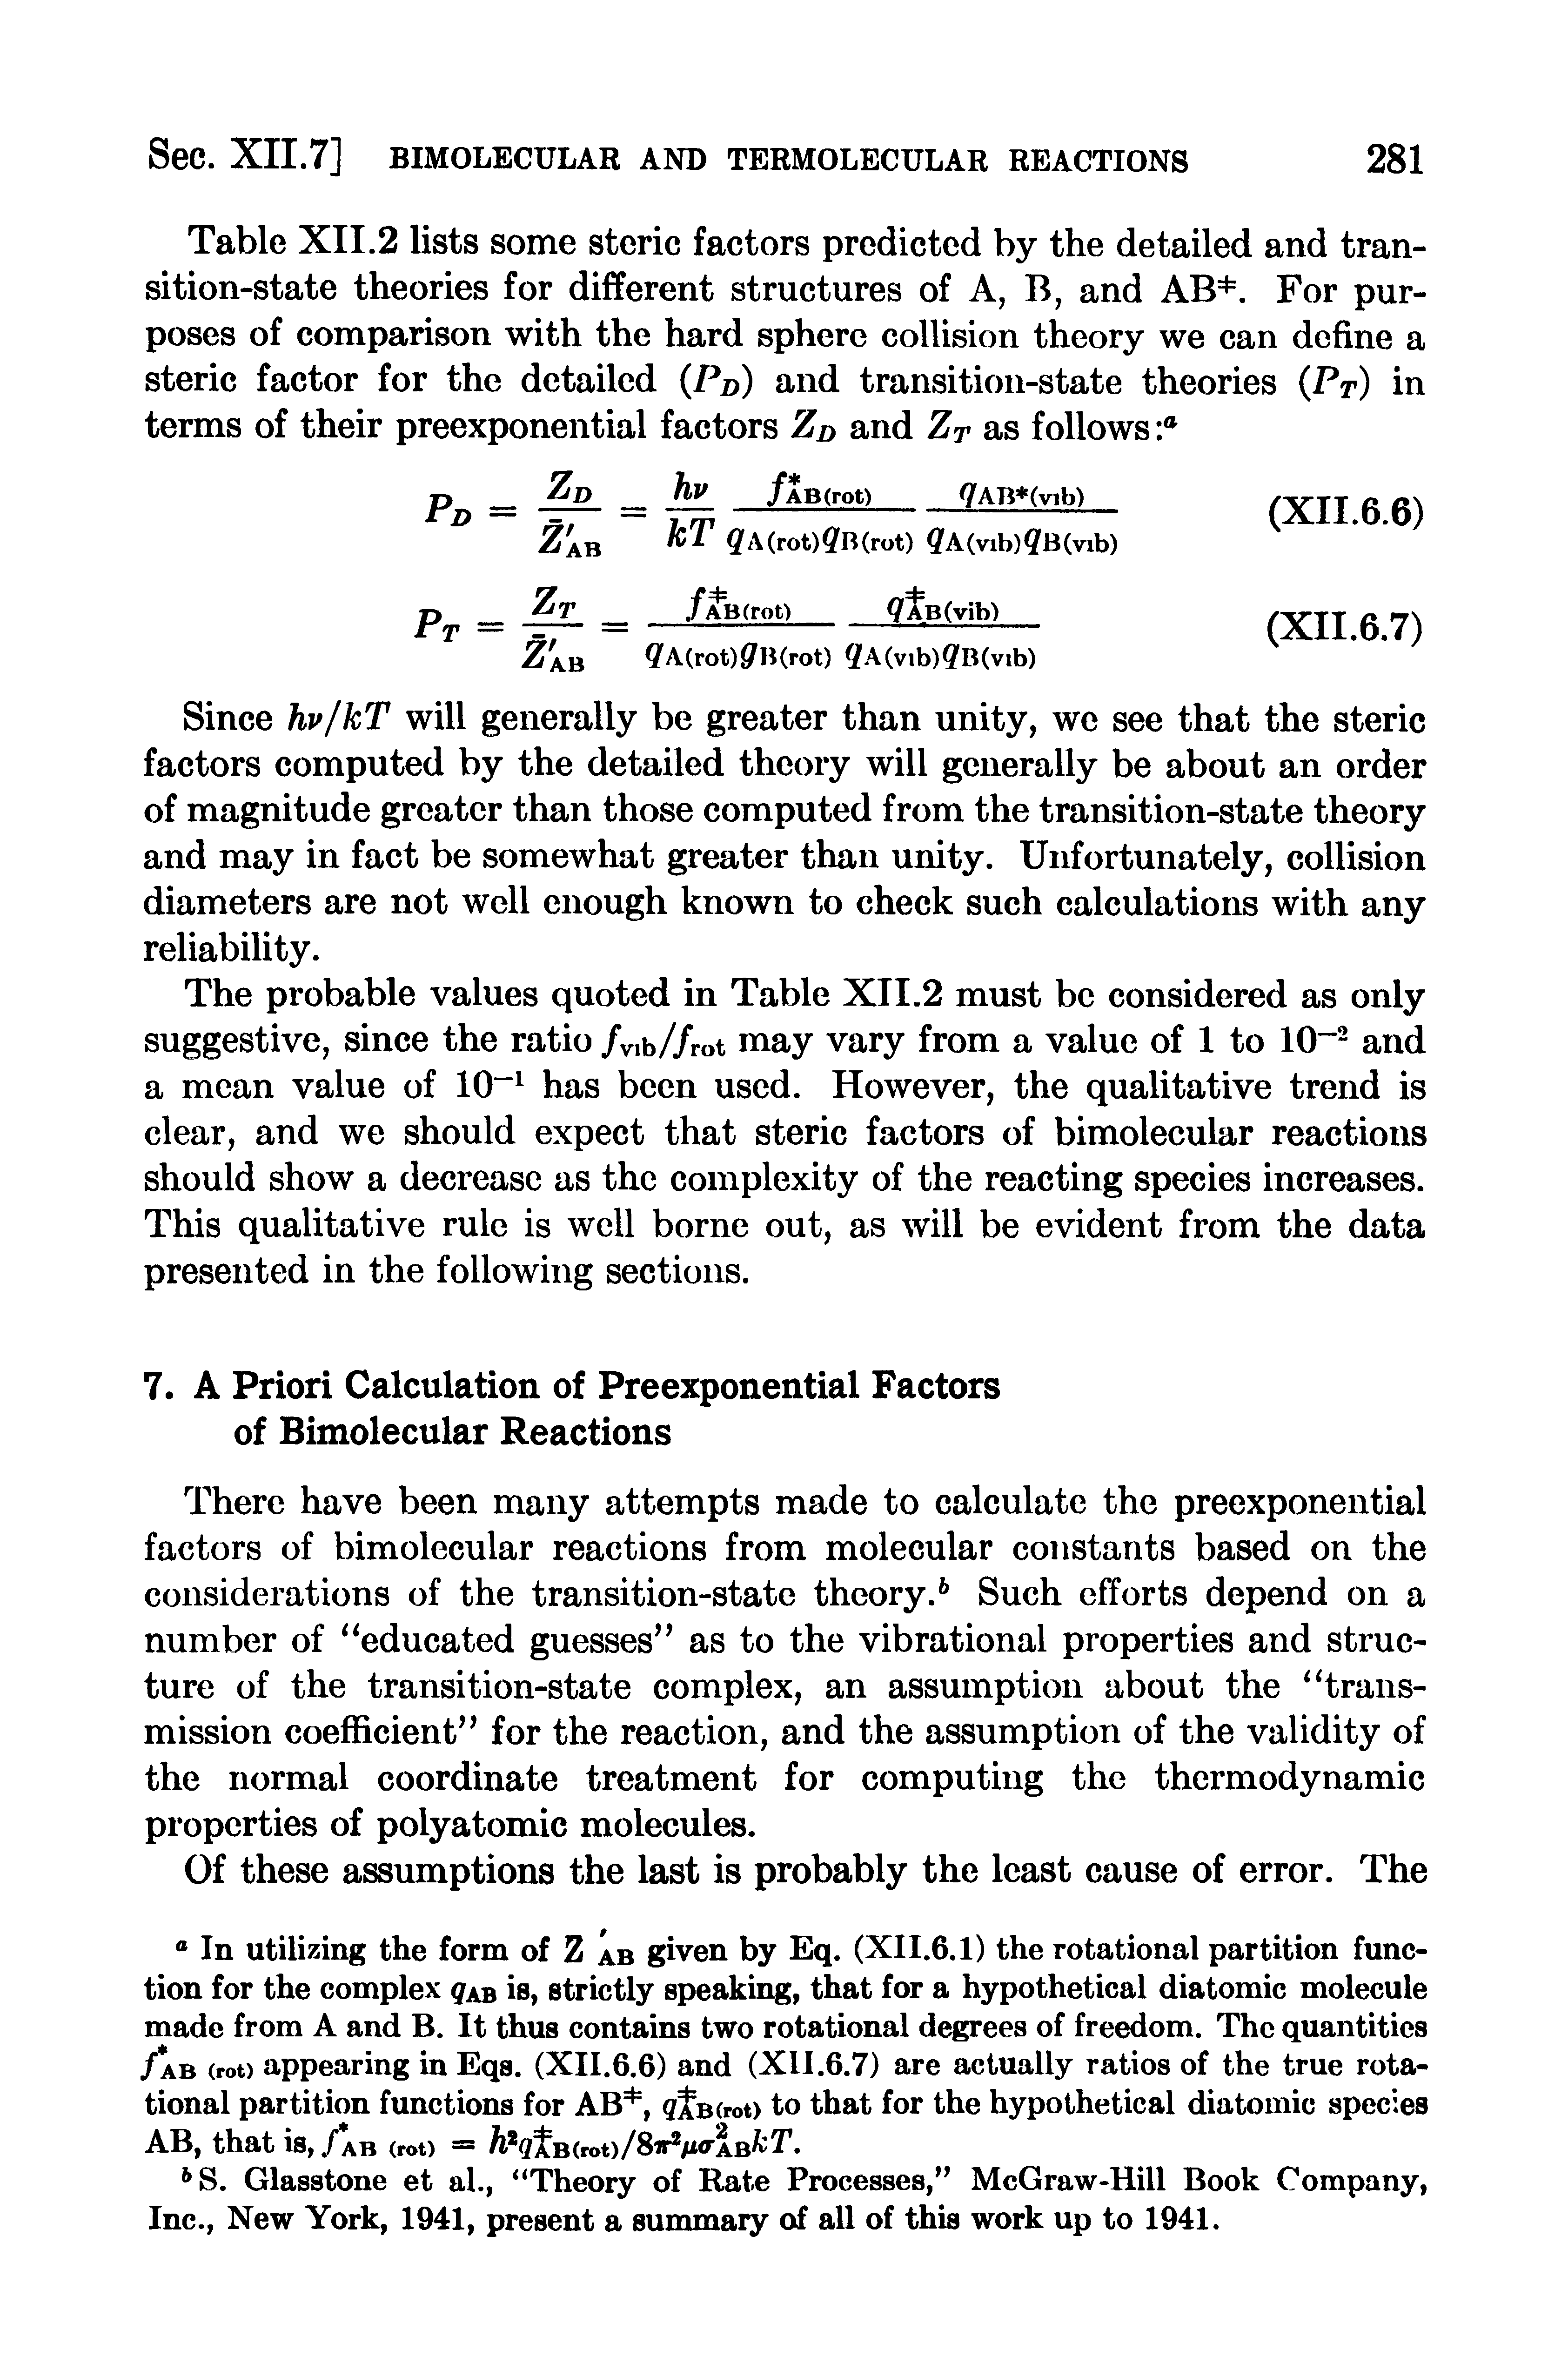 Table XII.2 lists some stcric factors predicted by the detailed and transition-state theories for different structures of A, B, and For pur-...